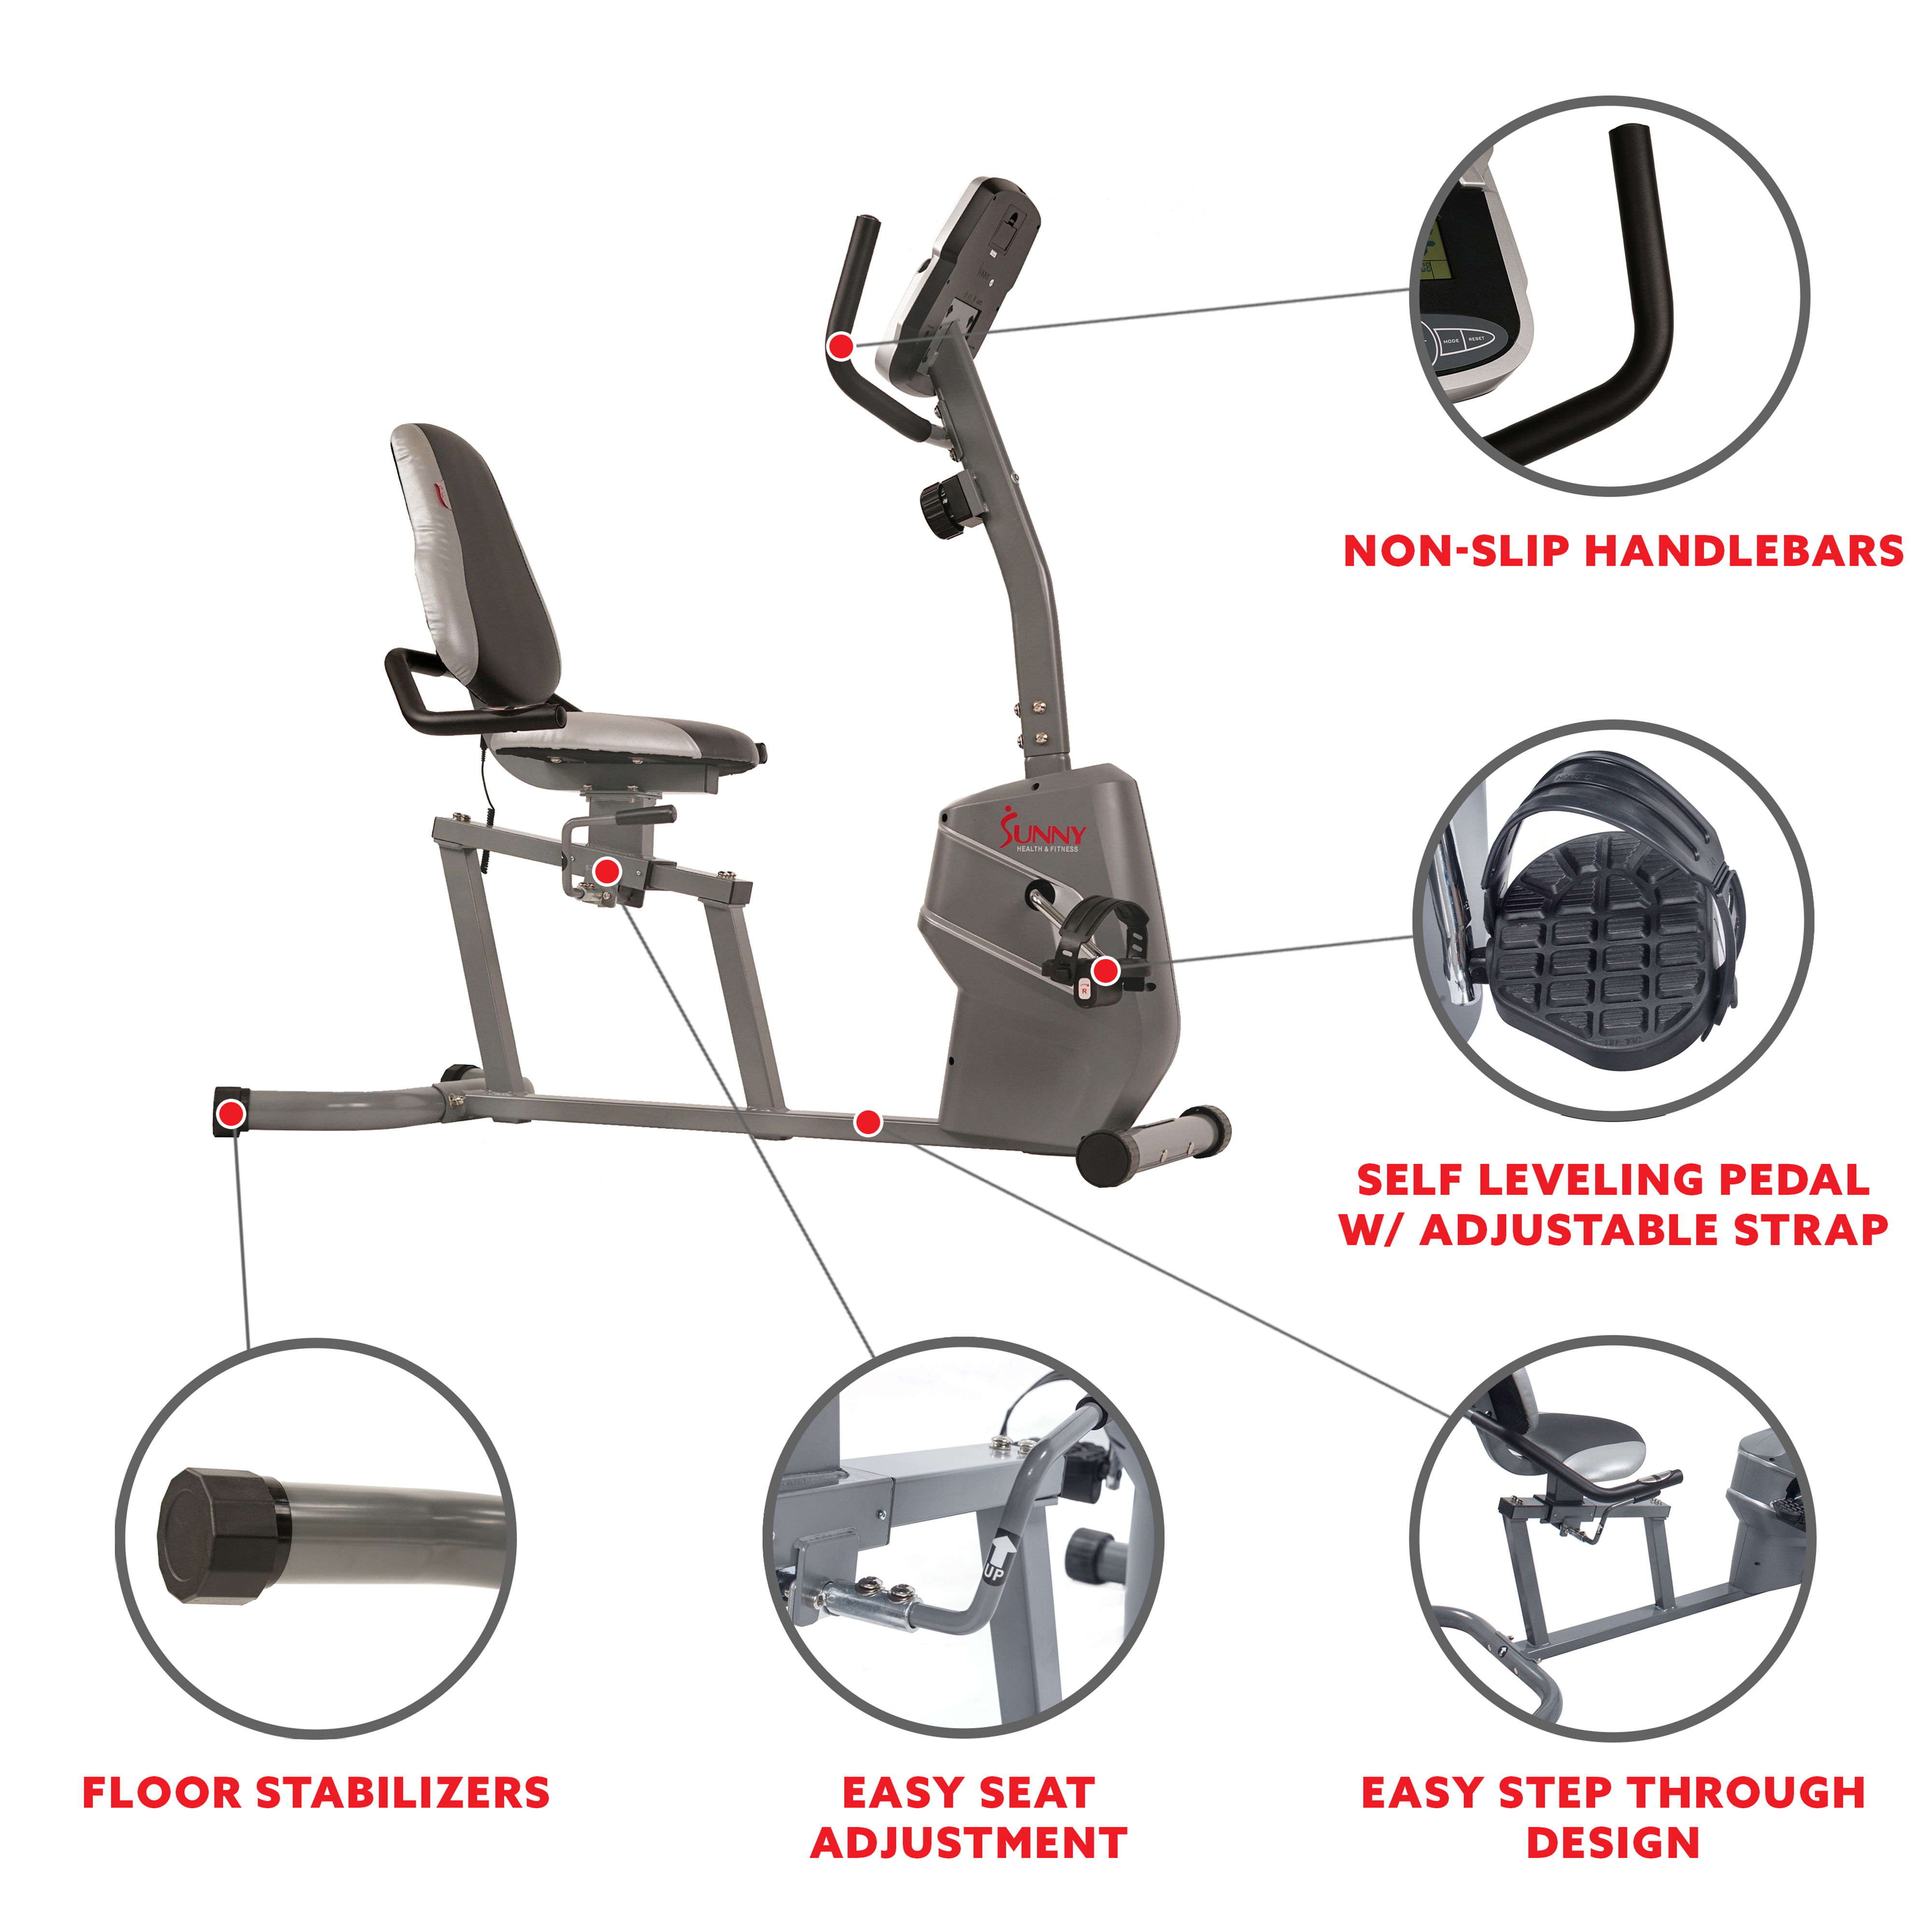 Sunny Health & Fitness Stationary Recumbent Exercise Bike Machine for Home Cardio Training w/Pulse Sensor, LCD Monitor, SF-RB4806 - image 3 of 12